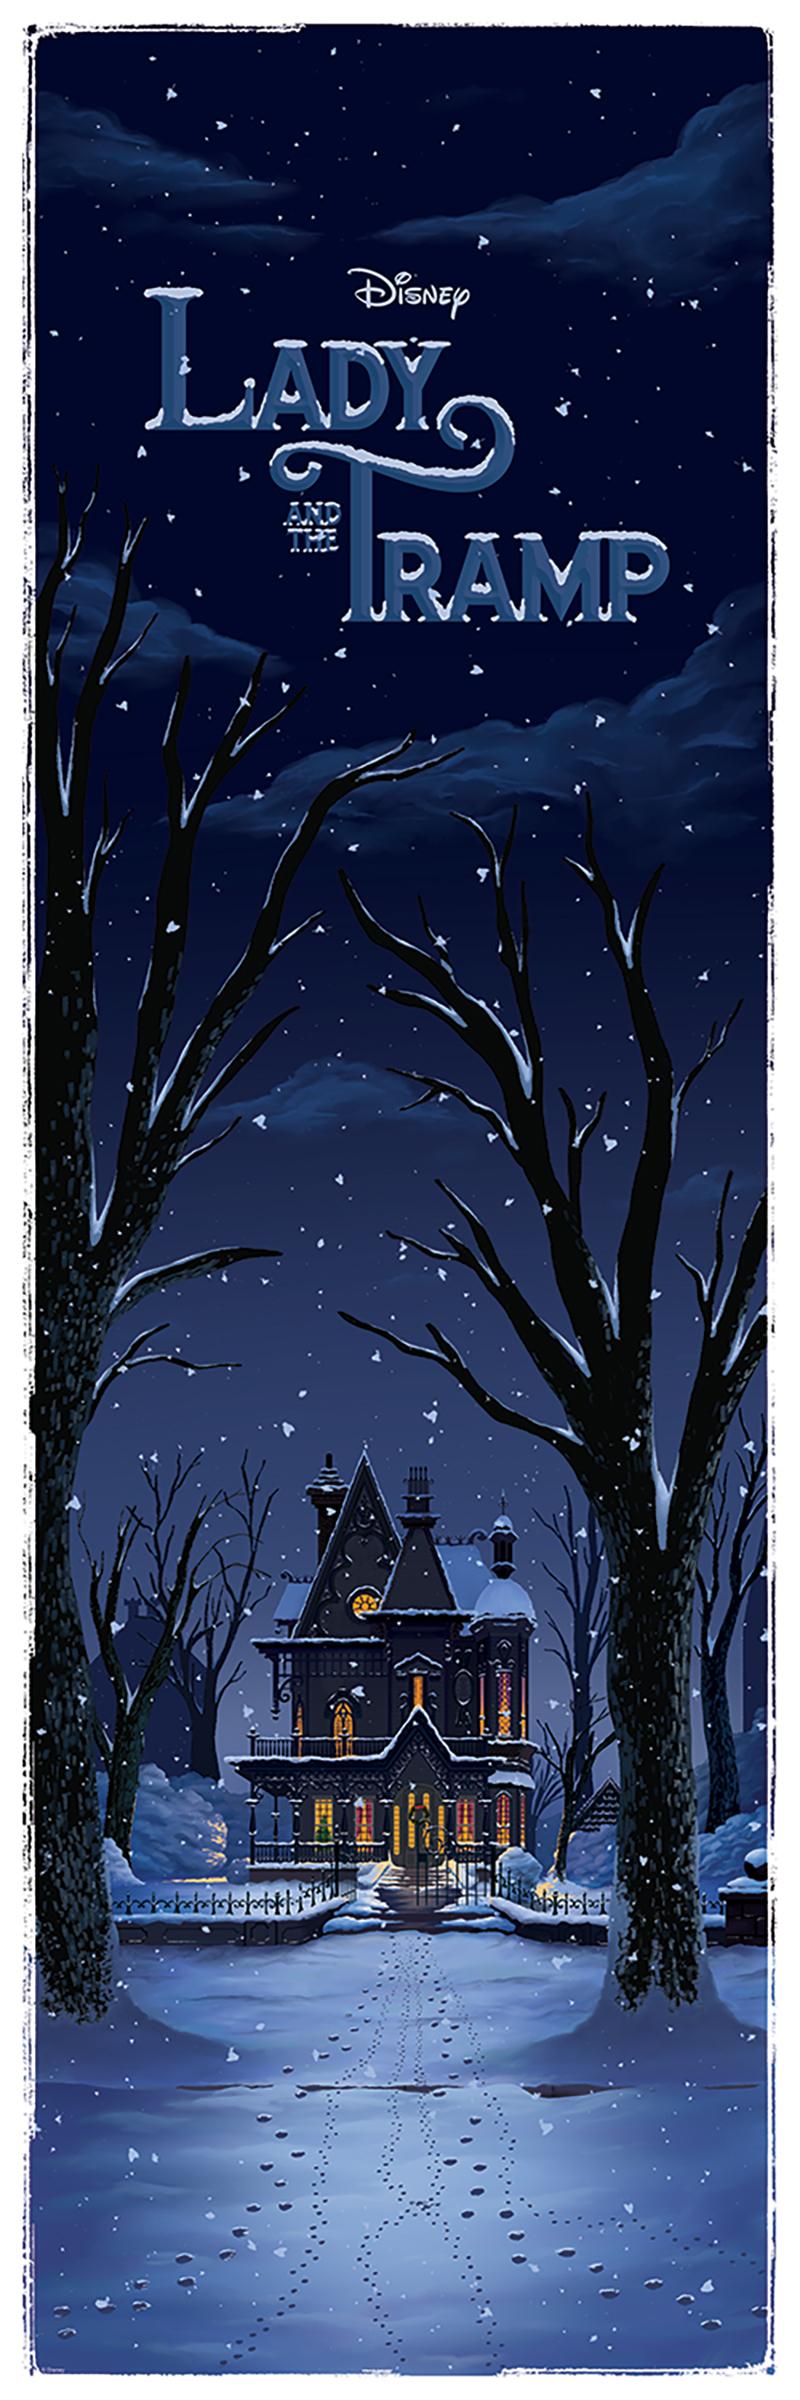 Ben Harman - Lady and the Tramp: Winter - Contemporary Cinema Film Movie Posters